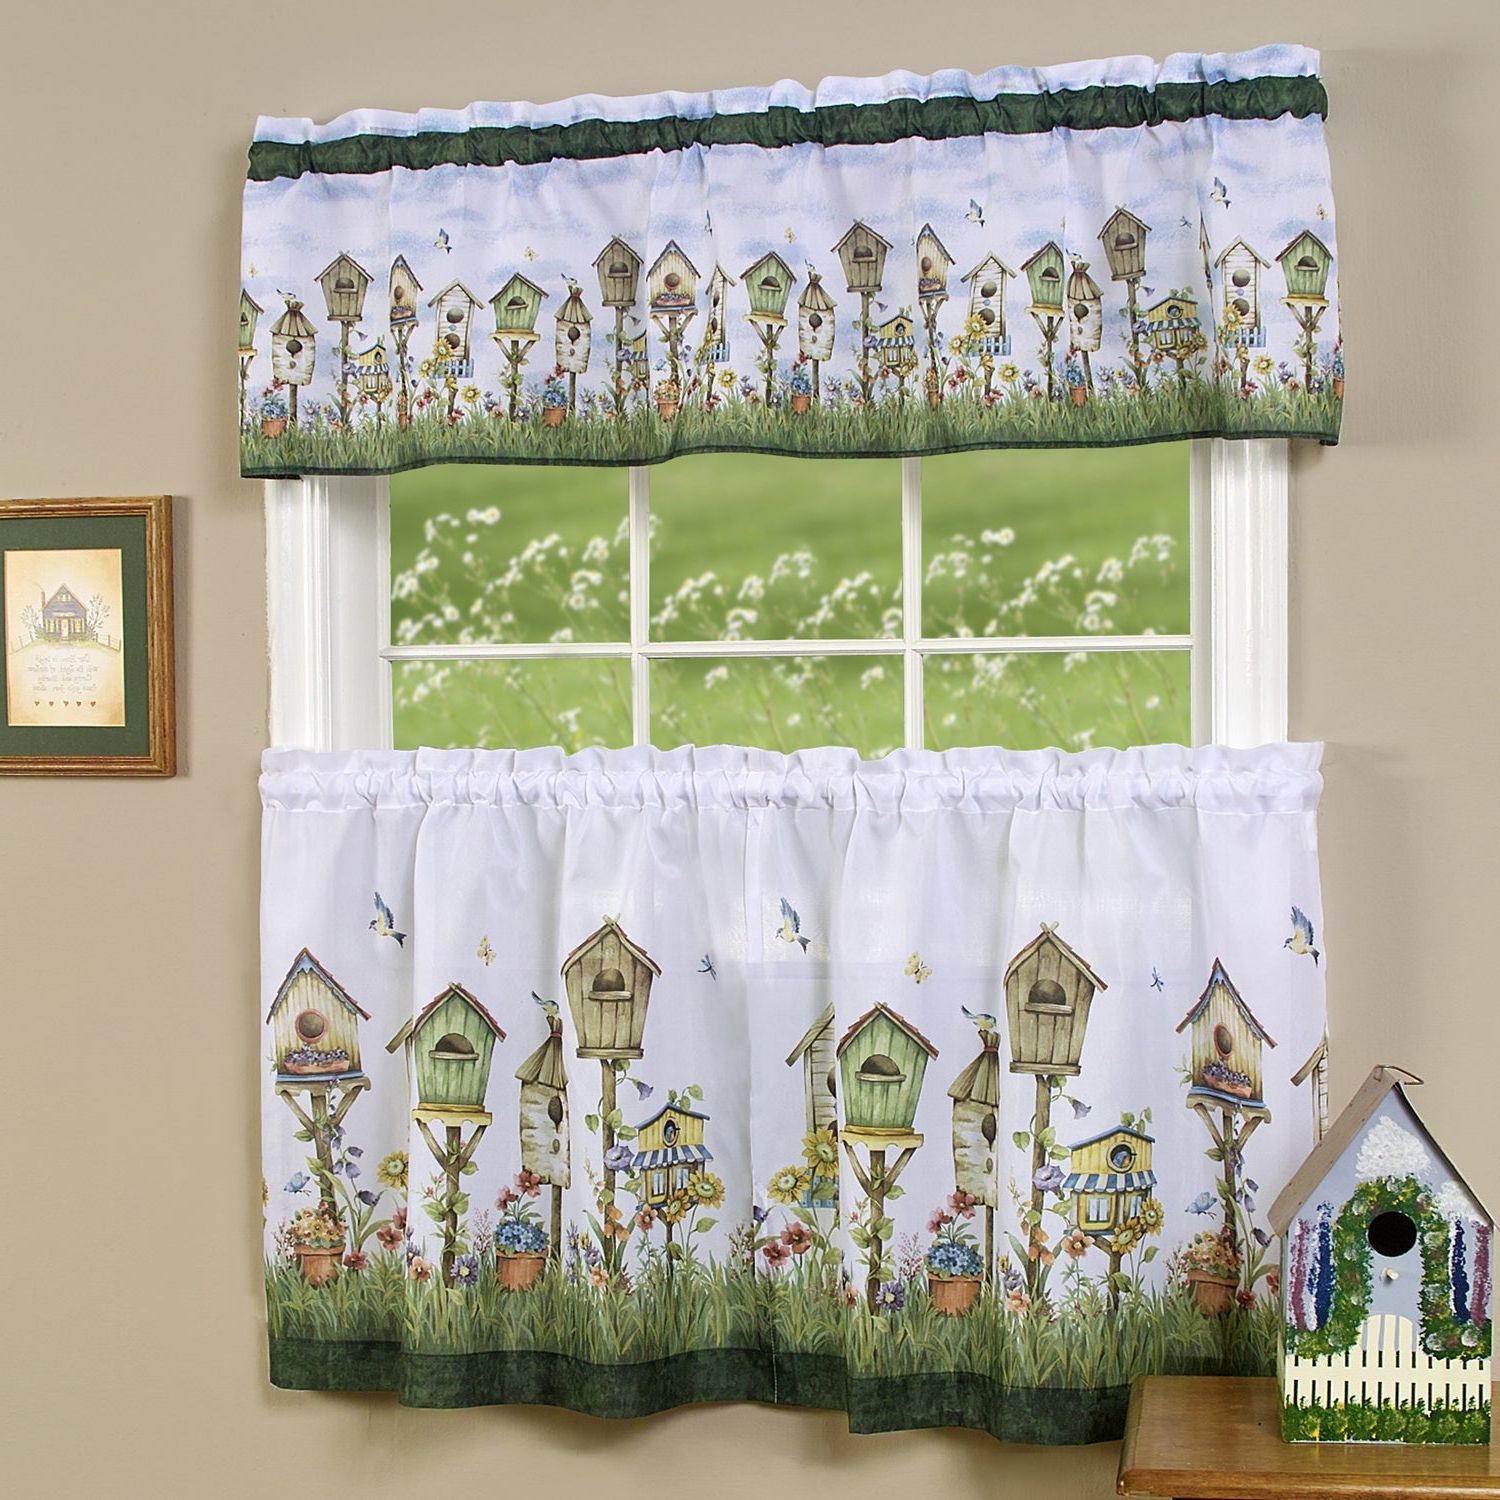 Traditional Two Piece Tailored Tier And Valance Window Curtains Set With  Whimsical Birdhouse Print – 36 Inch For Current Traditional Tailored Tier And Swag Window Curtains Sets With Ornate Flower Garden Print (View 5 of 20)